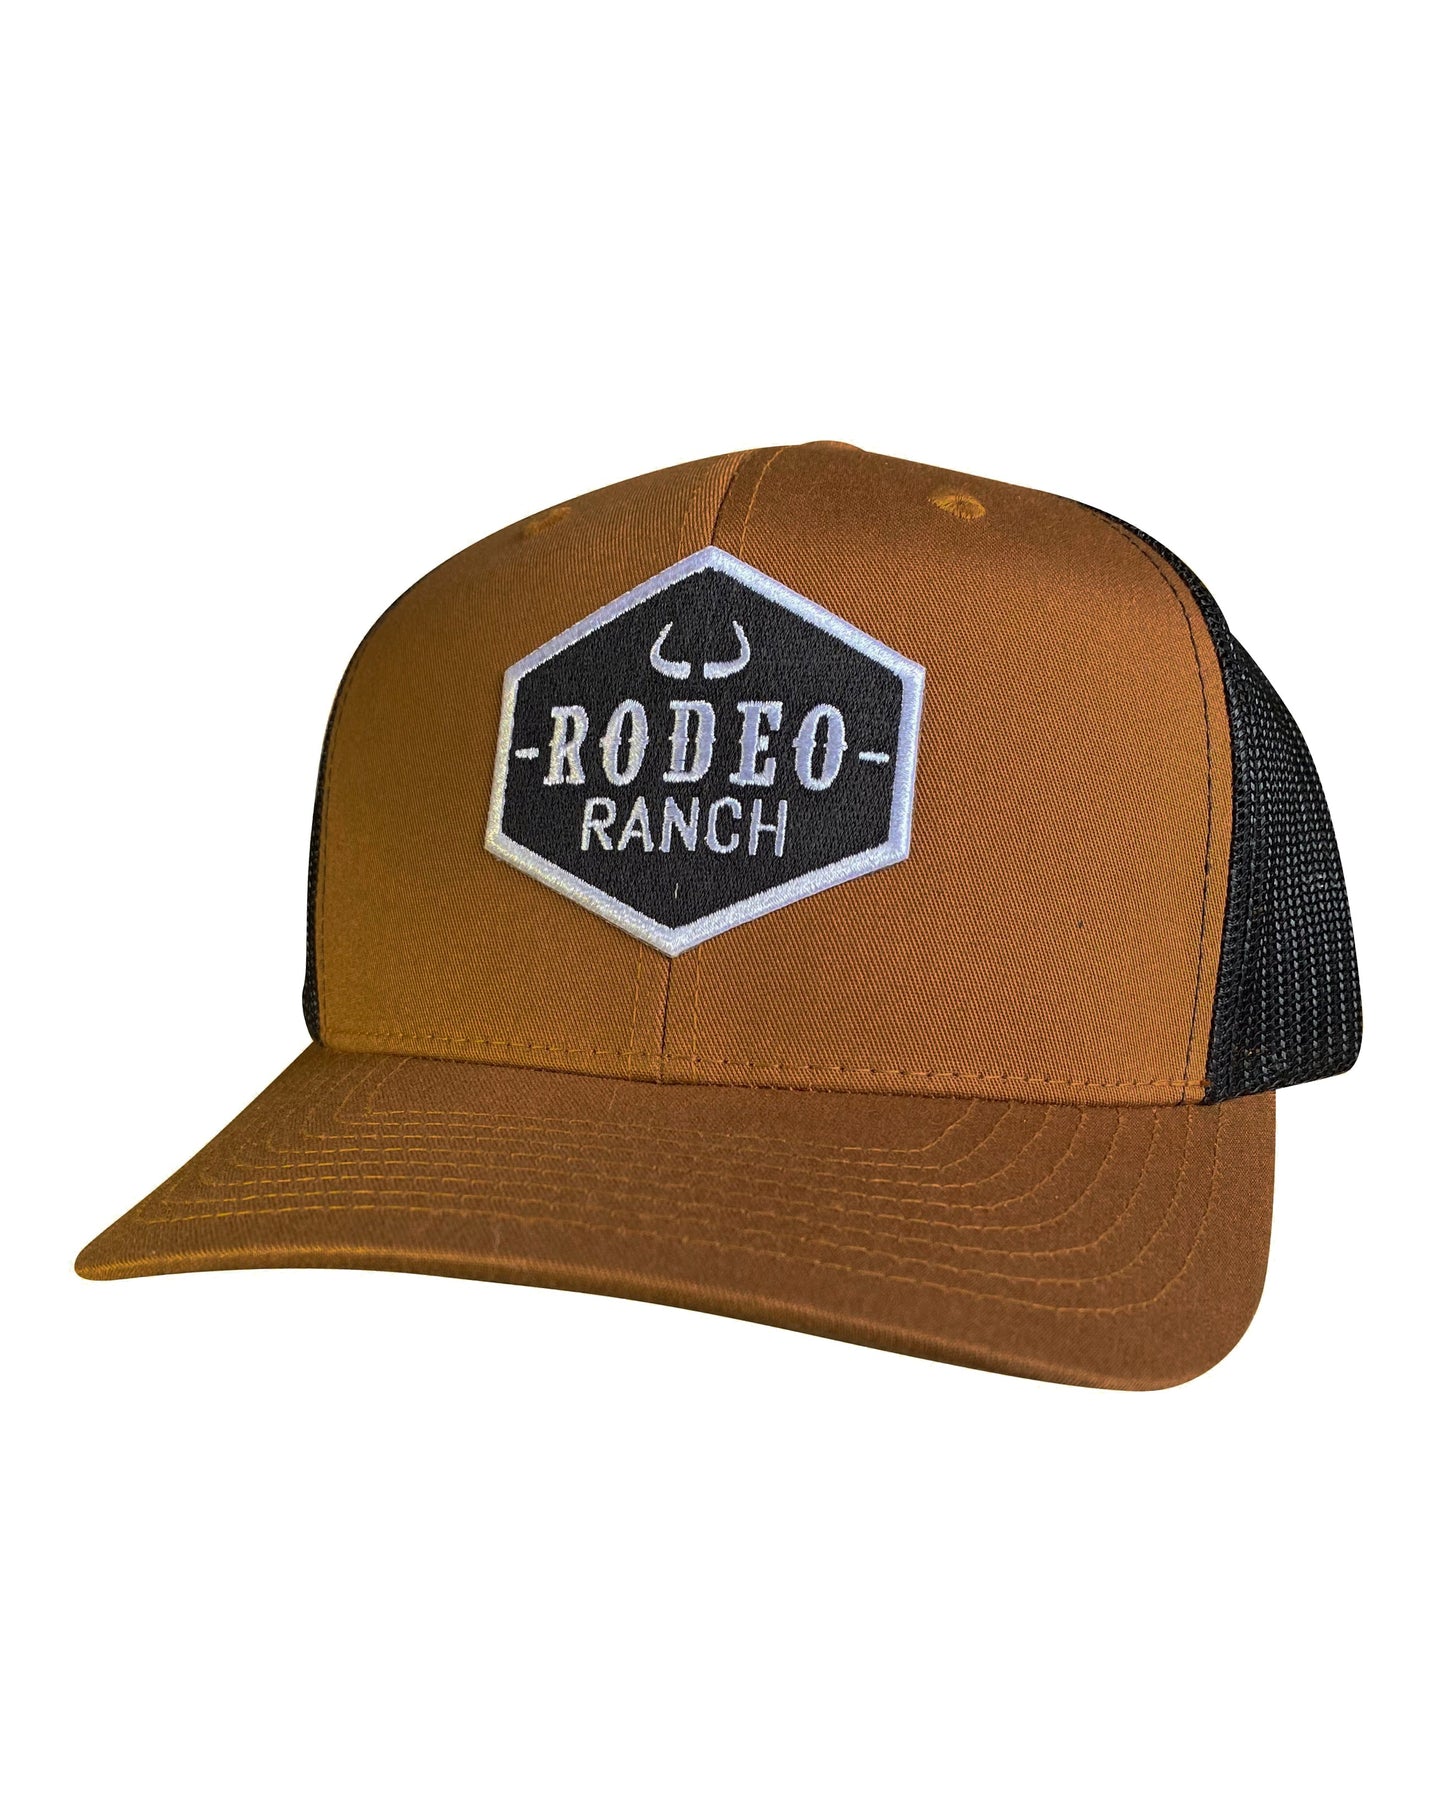 Rodeo Ranch Classic Logo Hat - Caramel and Black